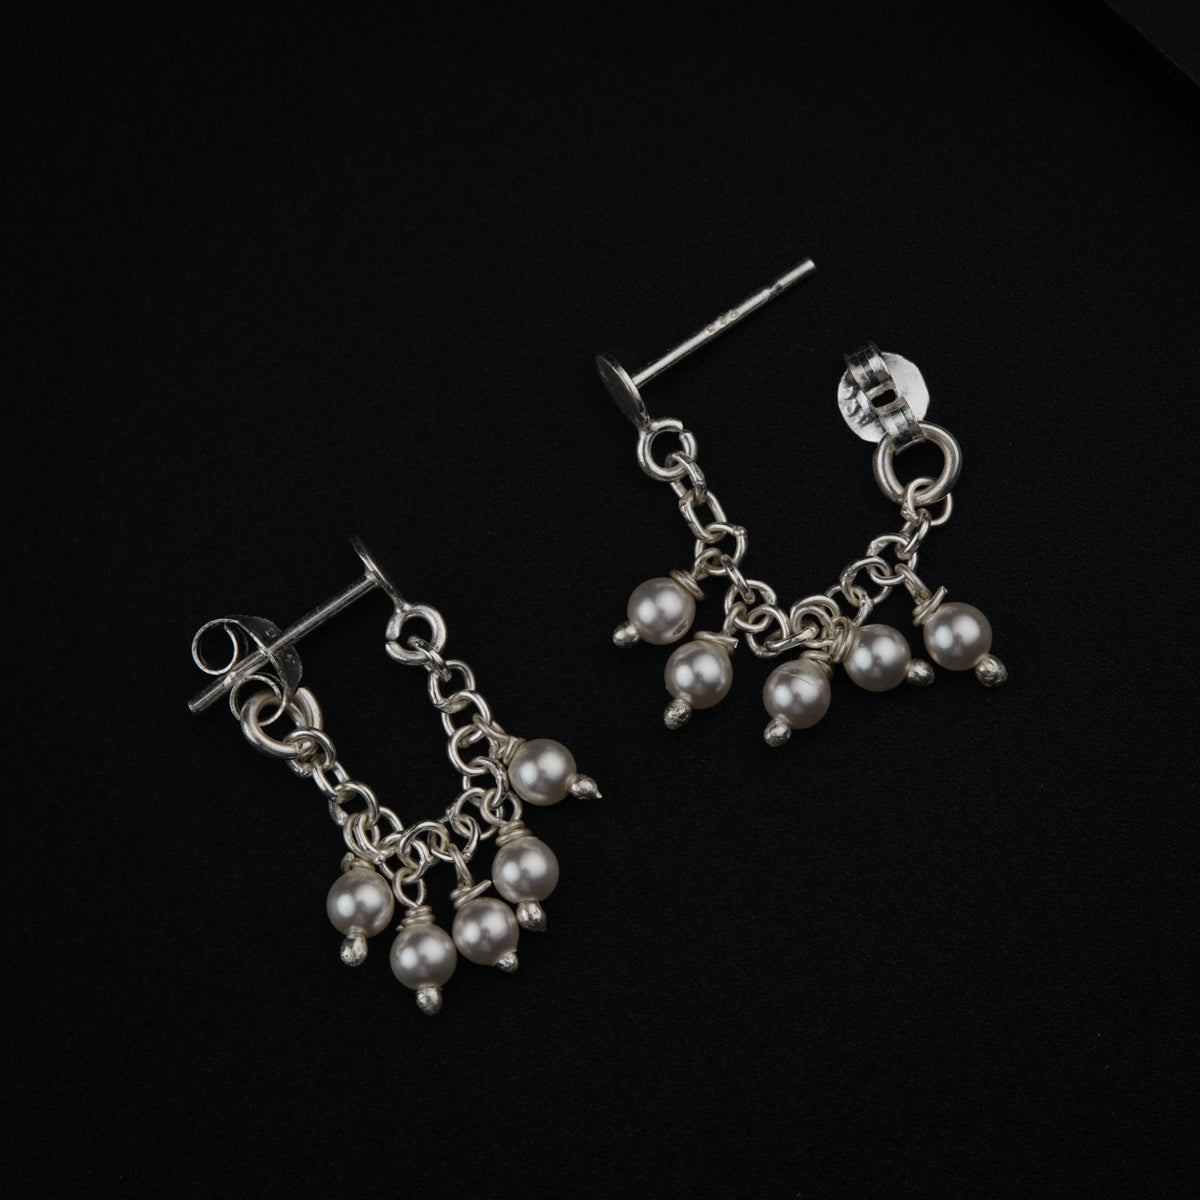 a pair of earrings with pearls hanging from them